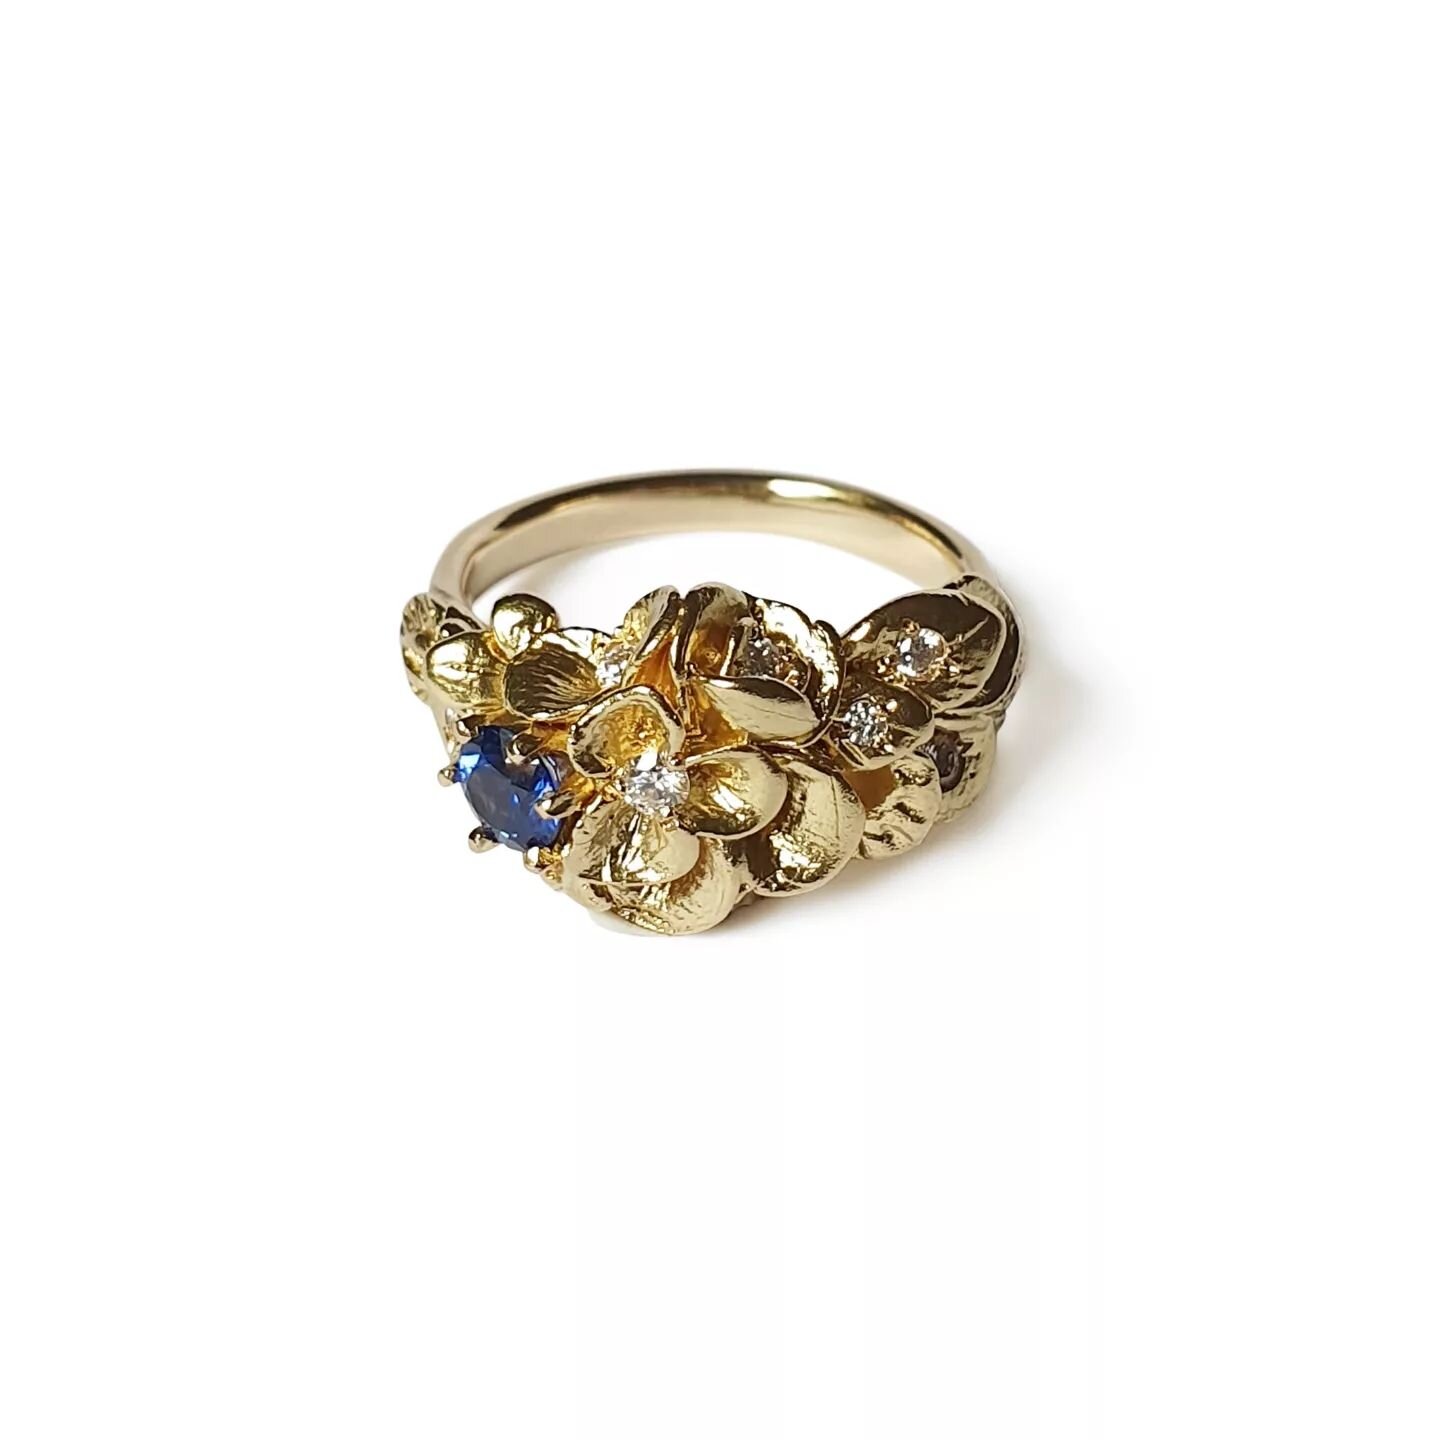 Hello friends💎

This is one of the first floral ring designs I made. It is still a favourite. 

This incarnation is in 18ct yellow gold,
with a striking ceylon sapphire and white diamonds set into the petals and leaves.

Fit for a queen don't you th